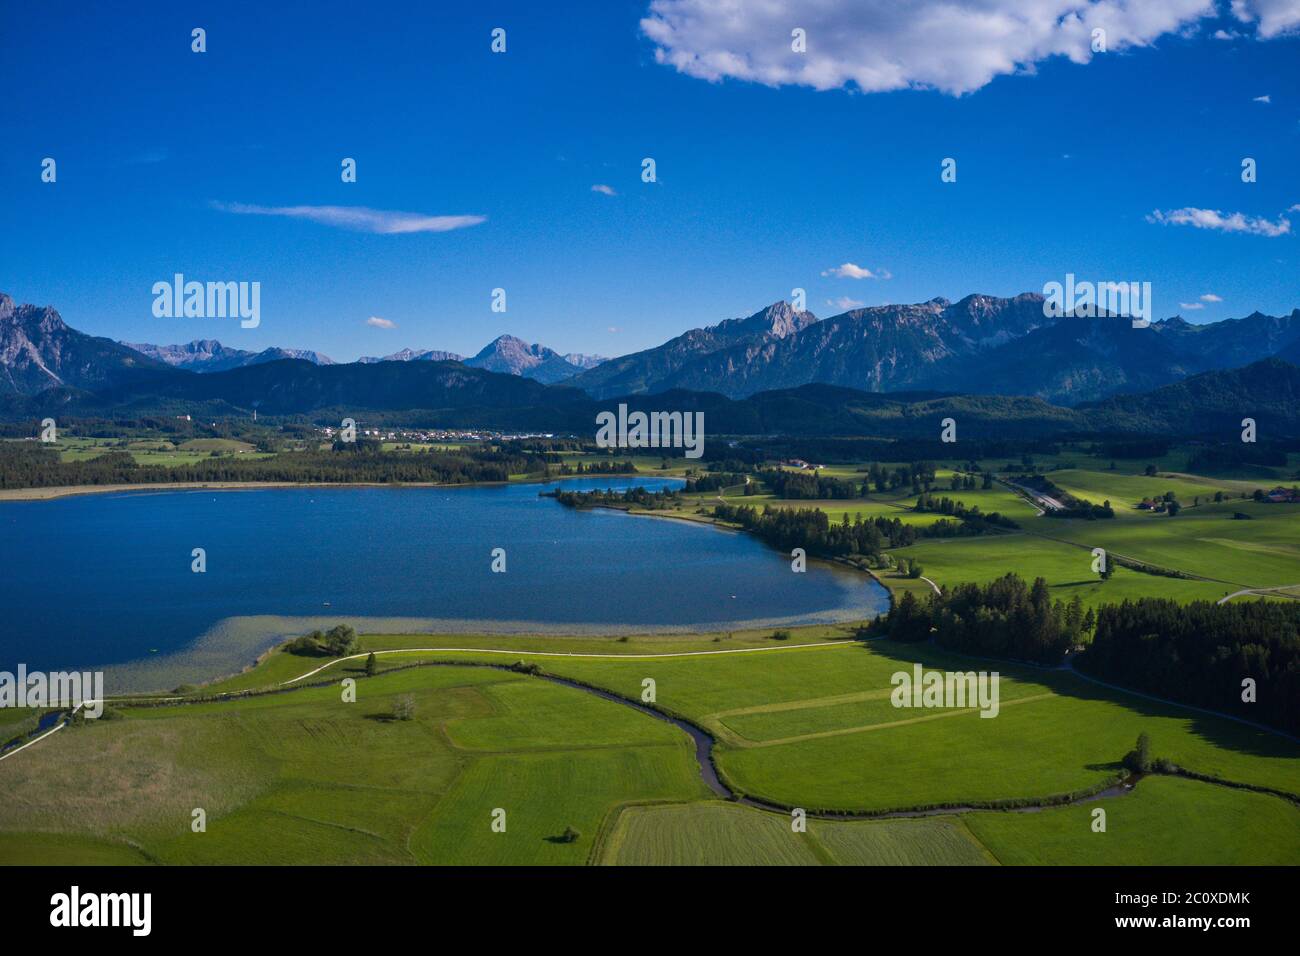 Hopfen am See, Germany, 12th June 2020  Hopfensee, a small lake for relax, sailing and swimming. © Peter Schatz / Alamy Stock Photos Stock Photo